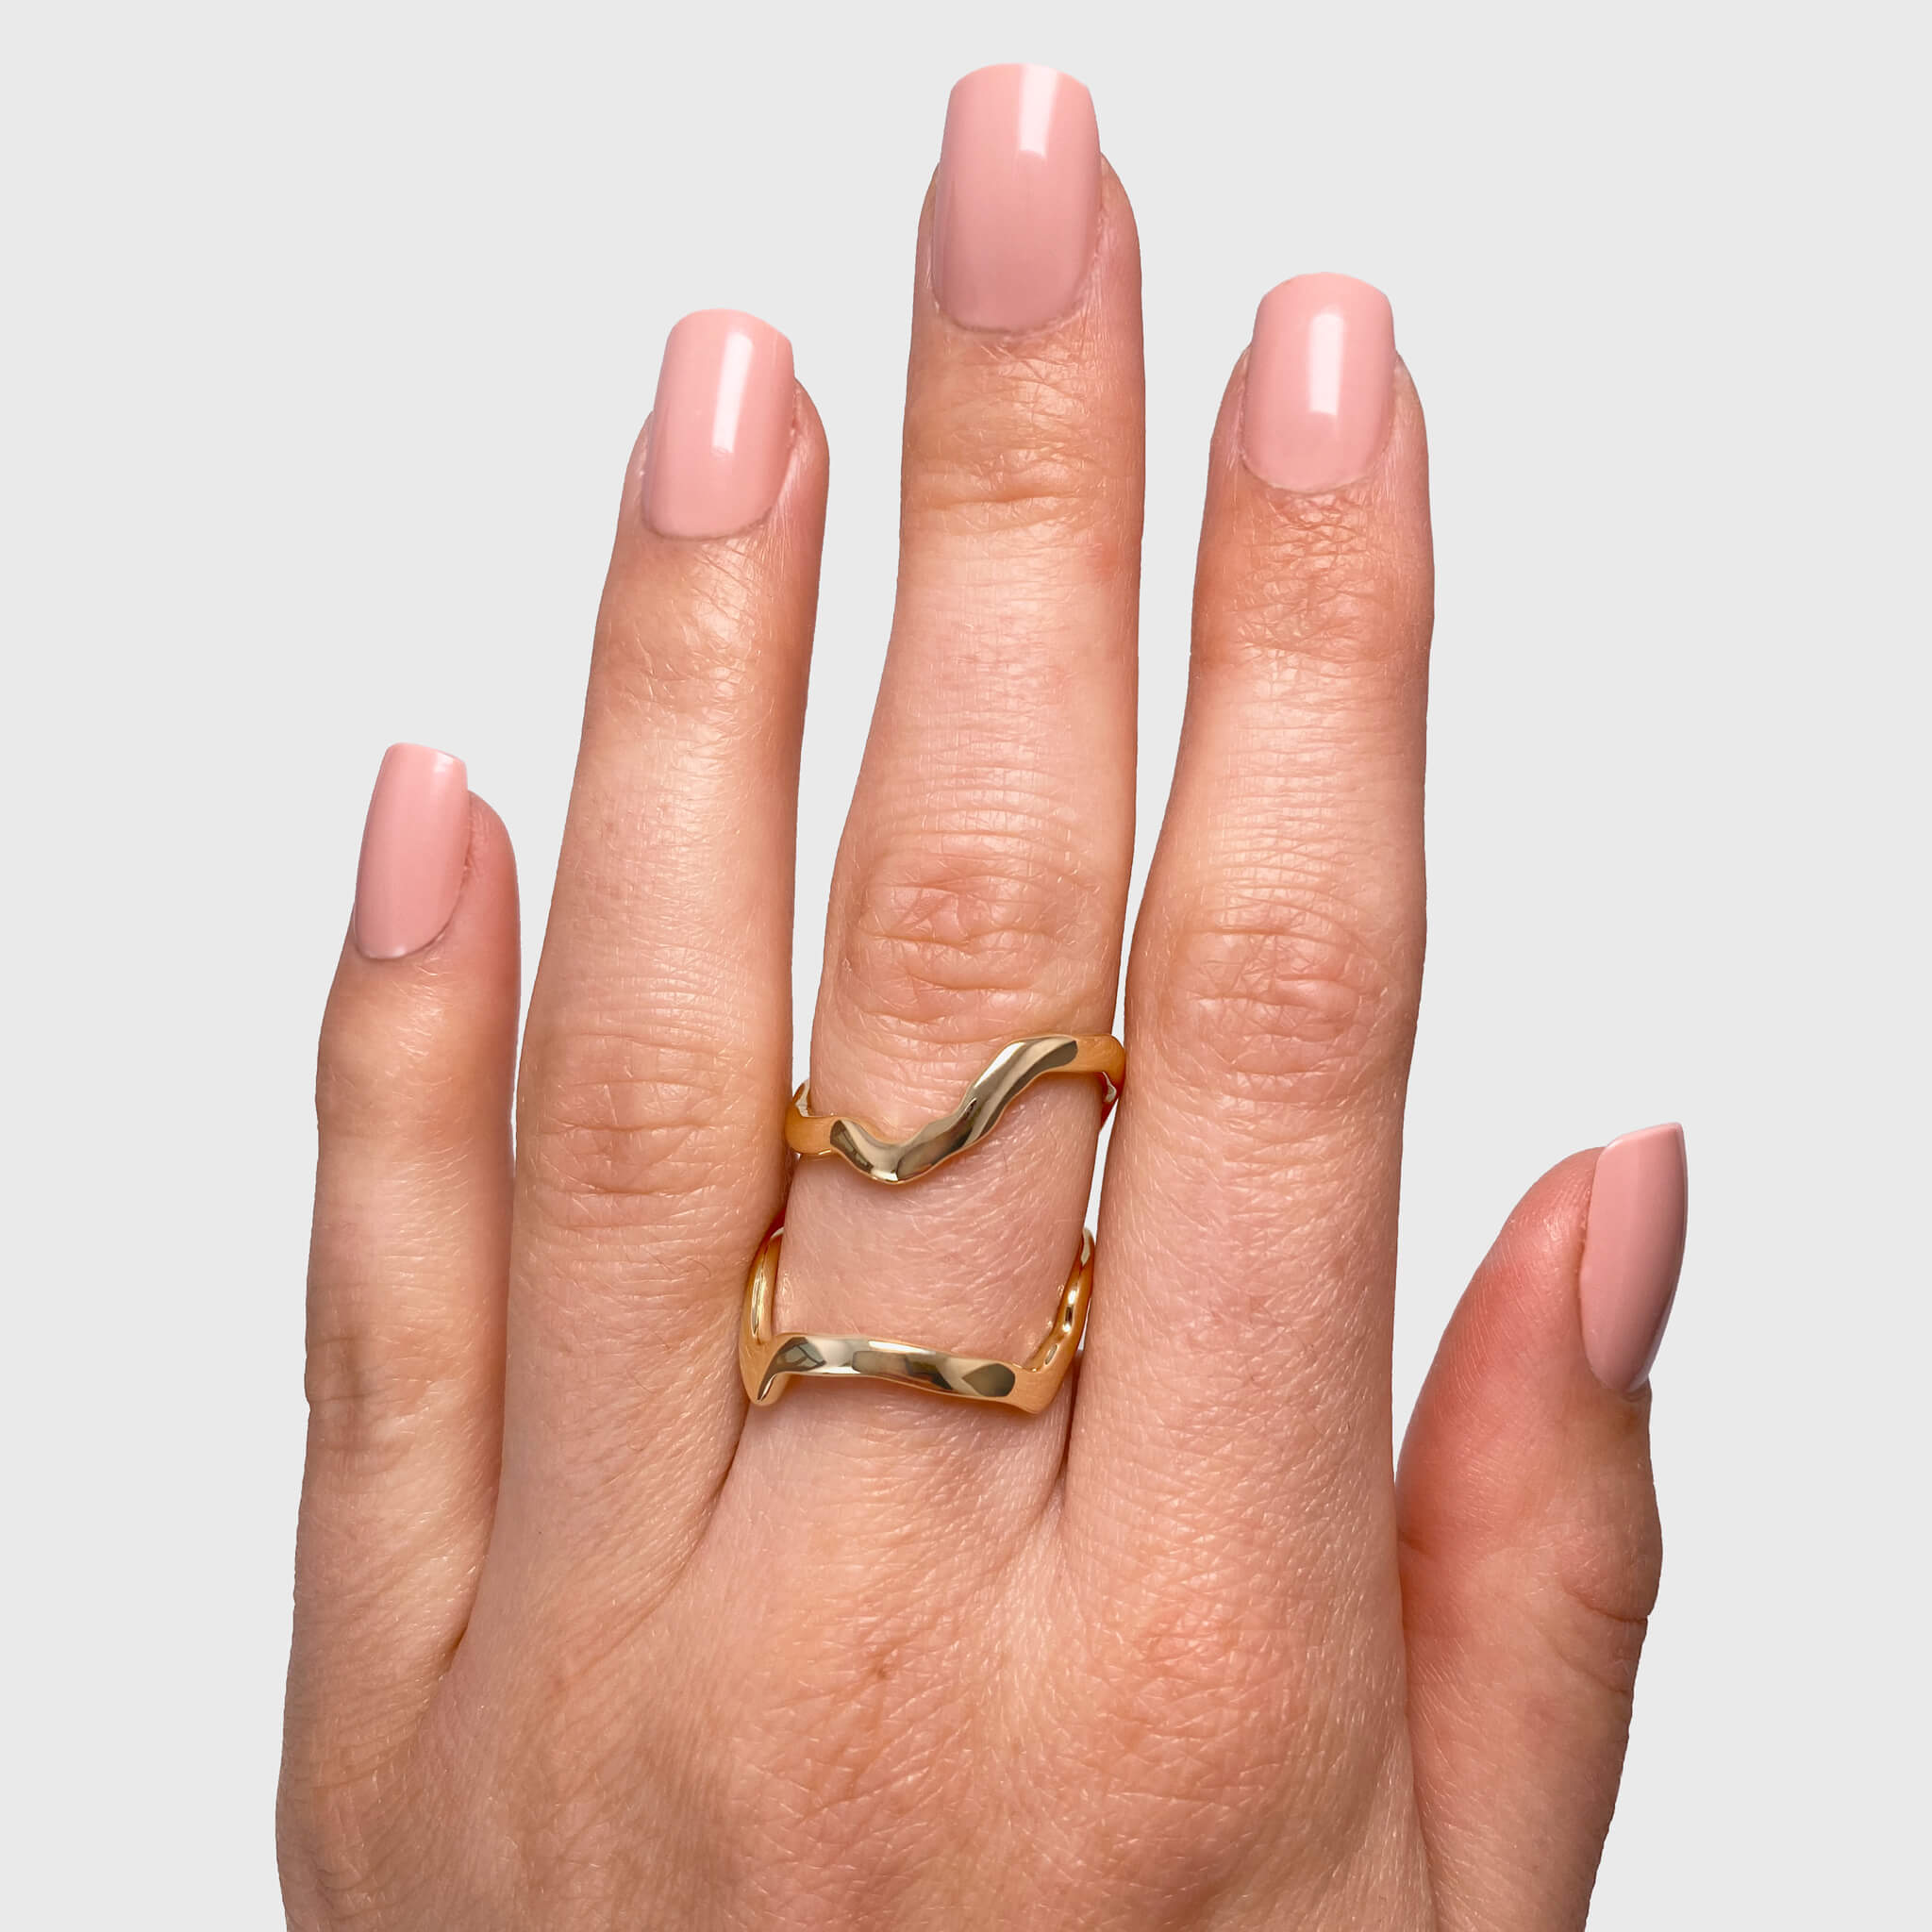 My Africa Wrap Ring in 14K Yellow Gold Hand View